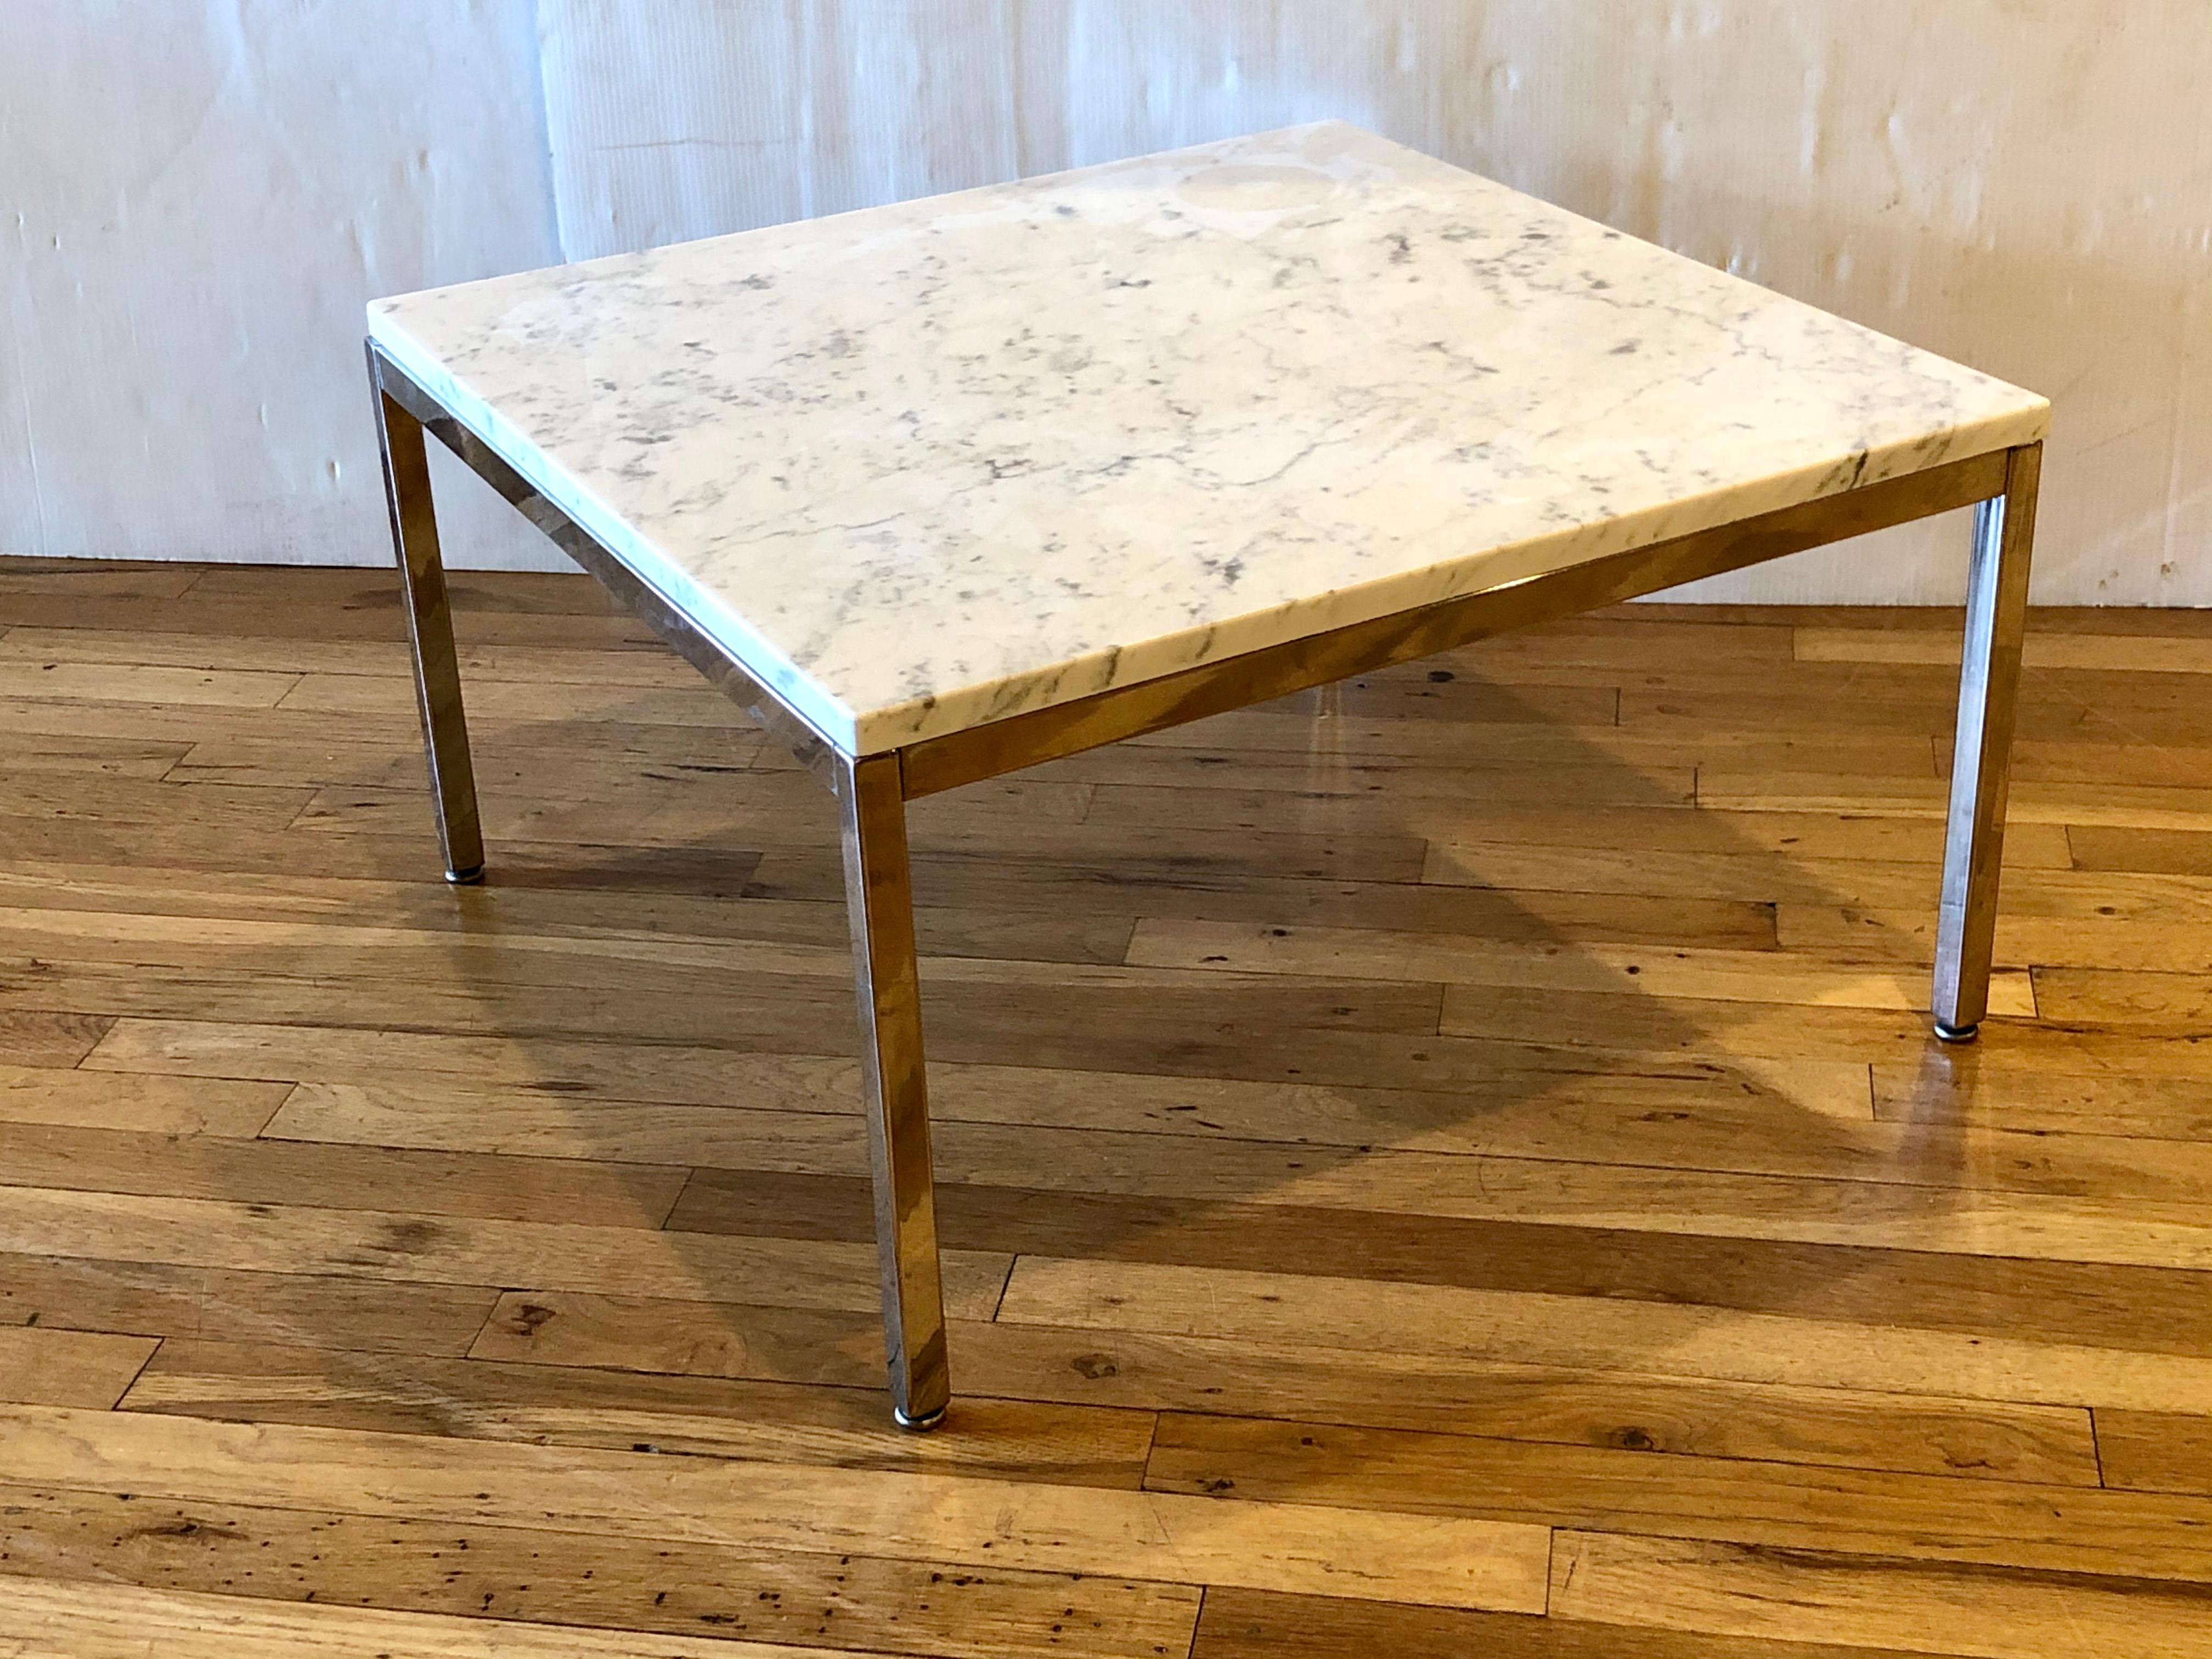 Beautiful simple elegant polished white Italian marble. On square polished chrome base designed by Knoll, this table has many uses in between 2 chairs as small coffee table, its simple and elegant we have polished the chrome and the marble top sits